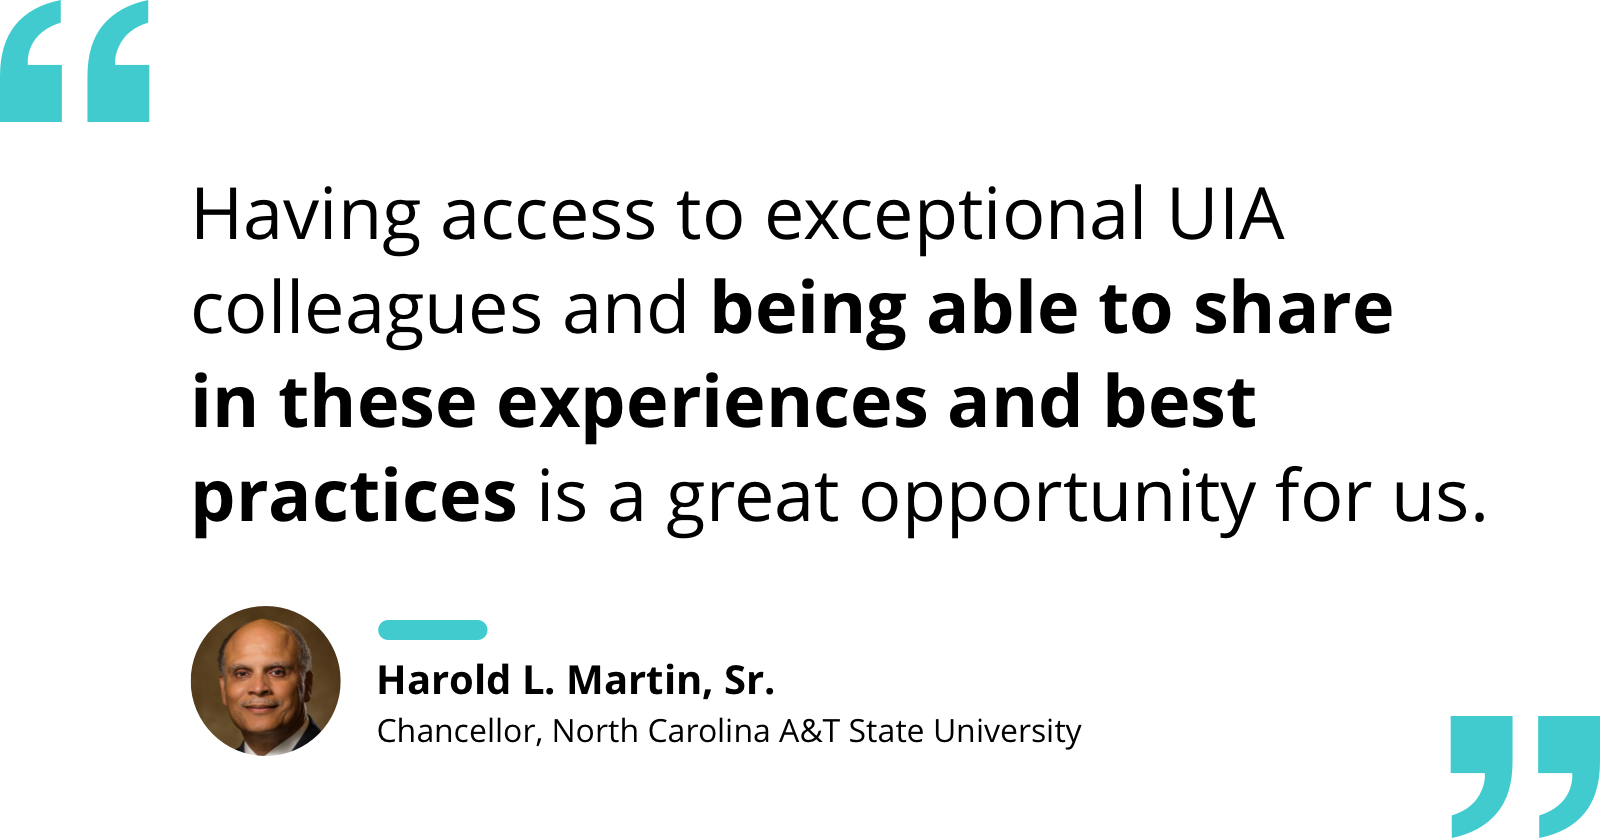 Quote by Harold L. Martin, Sr. re: gratitude for access to UIA colleagues who share experiences and best practices.